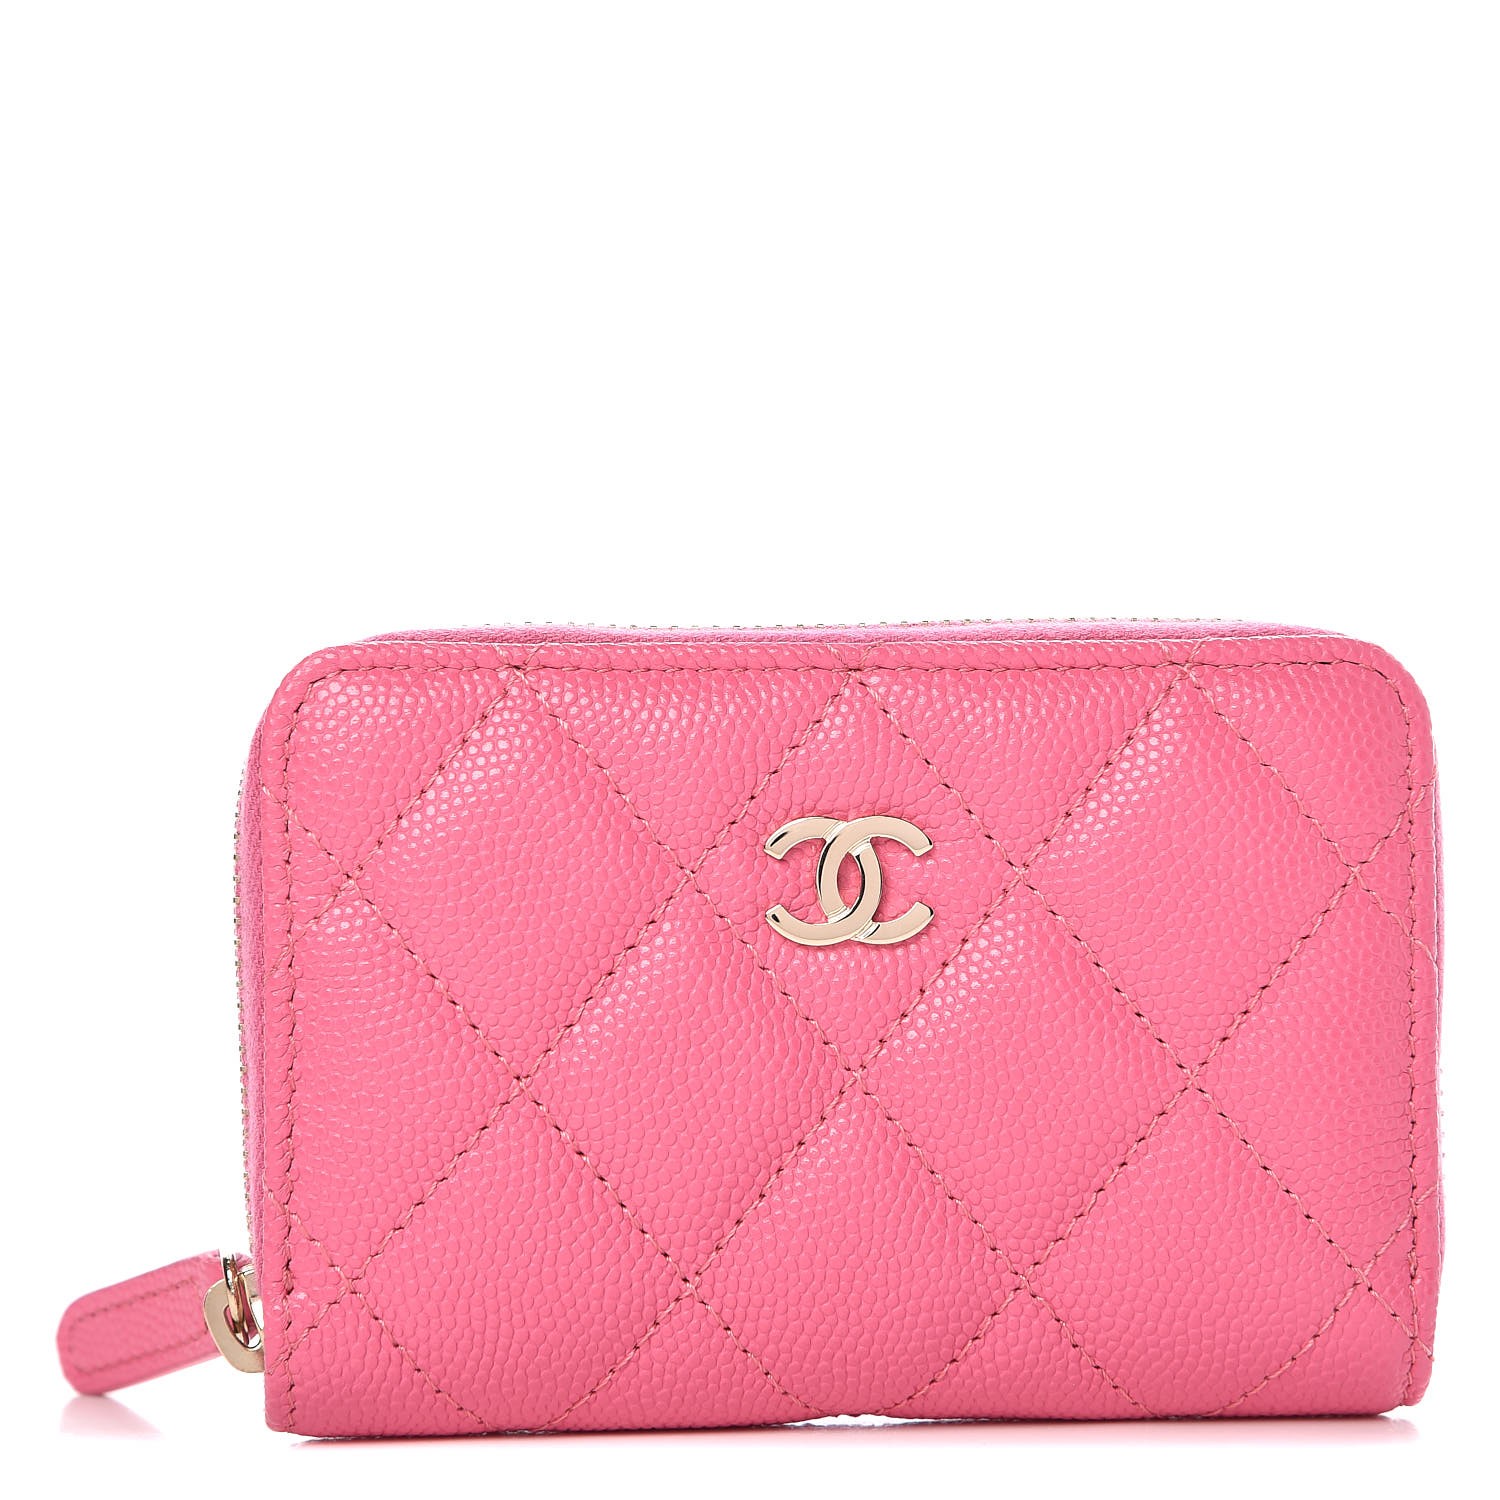 CHANEL Caviar Quilted Zip Coin Purse Pink 331770 | FASHIONPHILE